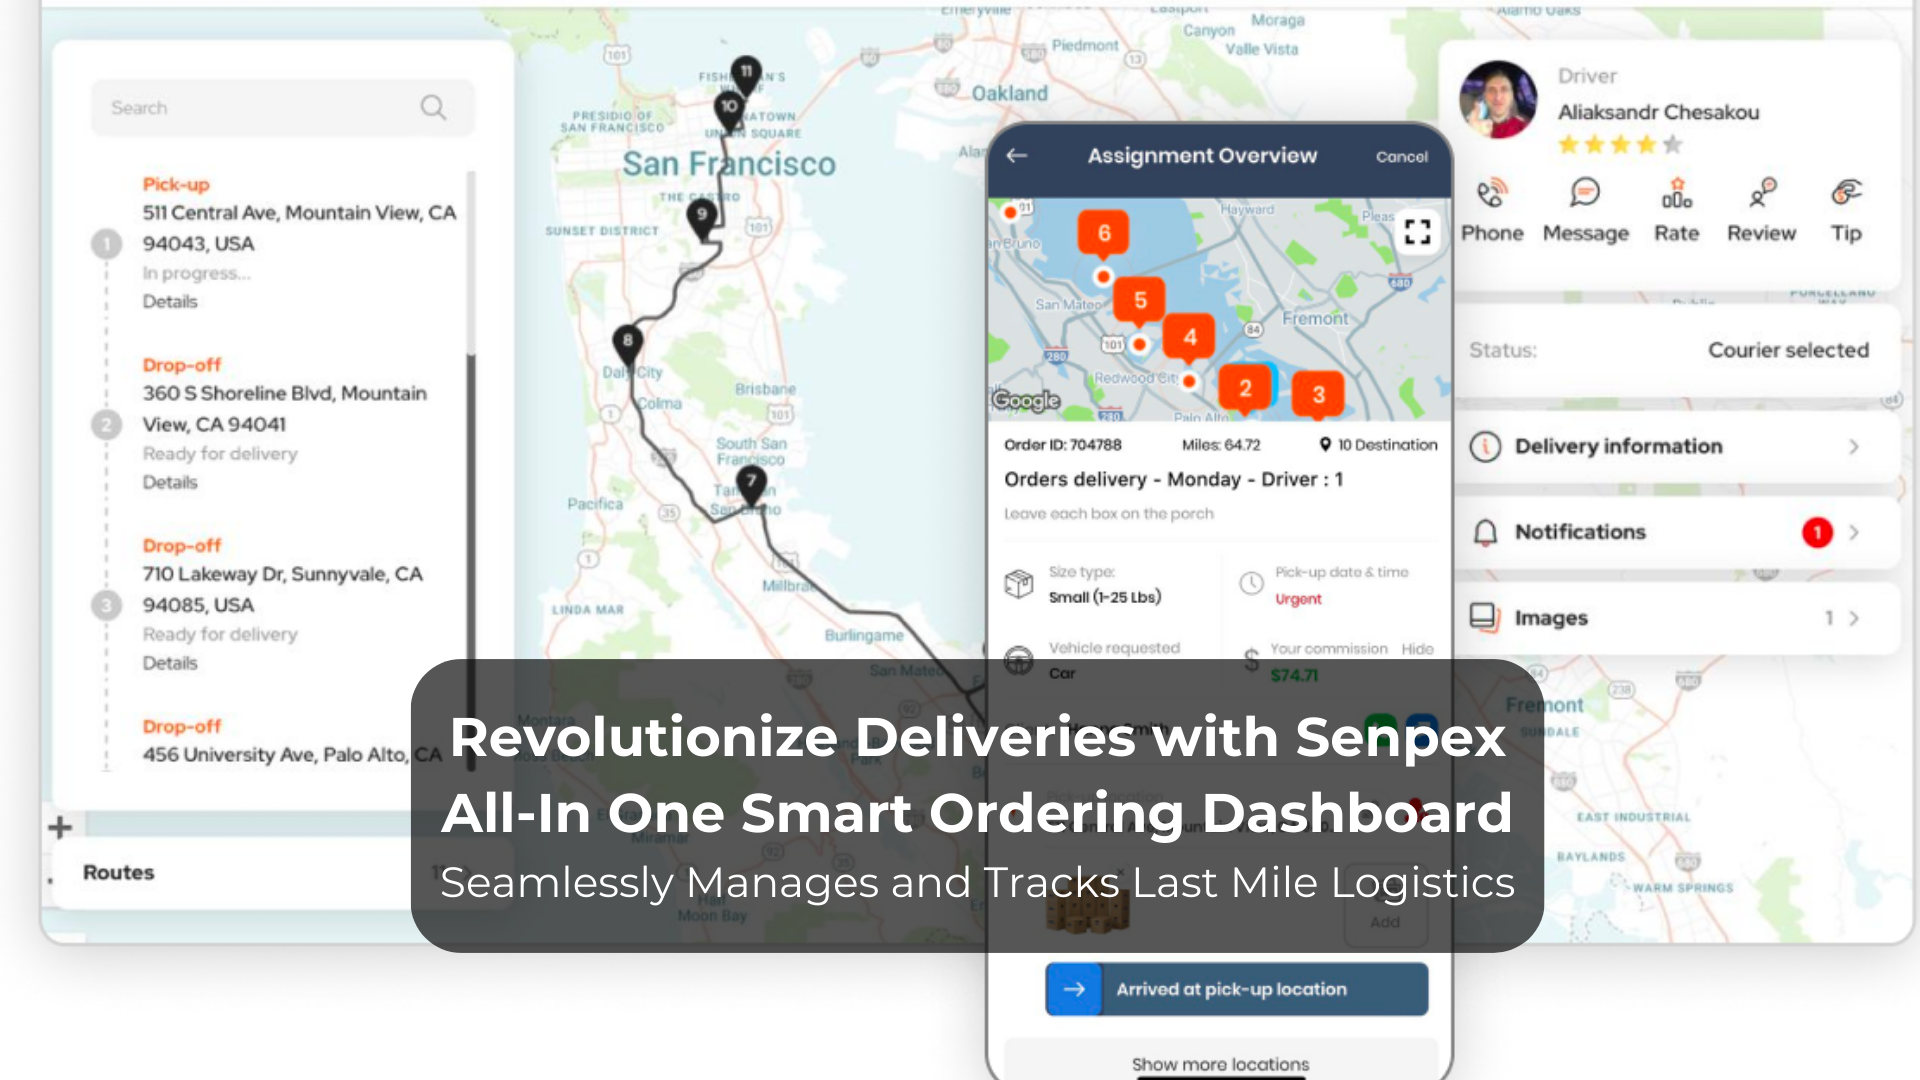 Revolutionize deliveries with Senpex All-In One Smart Ordering Dashboard: Seamlessly manages and tracks Last Mile Logistics